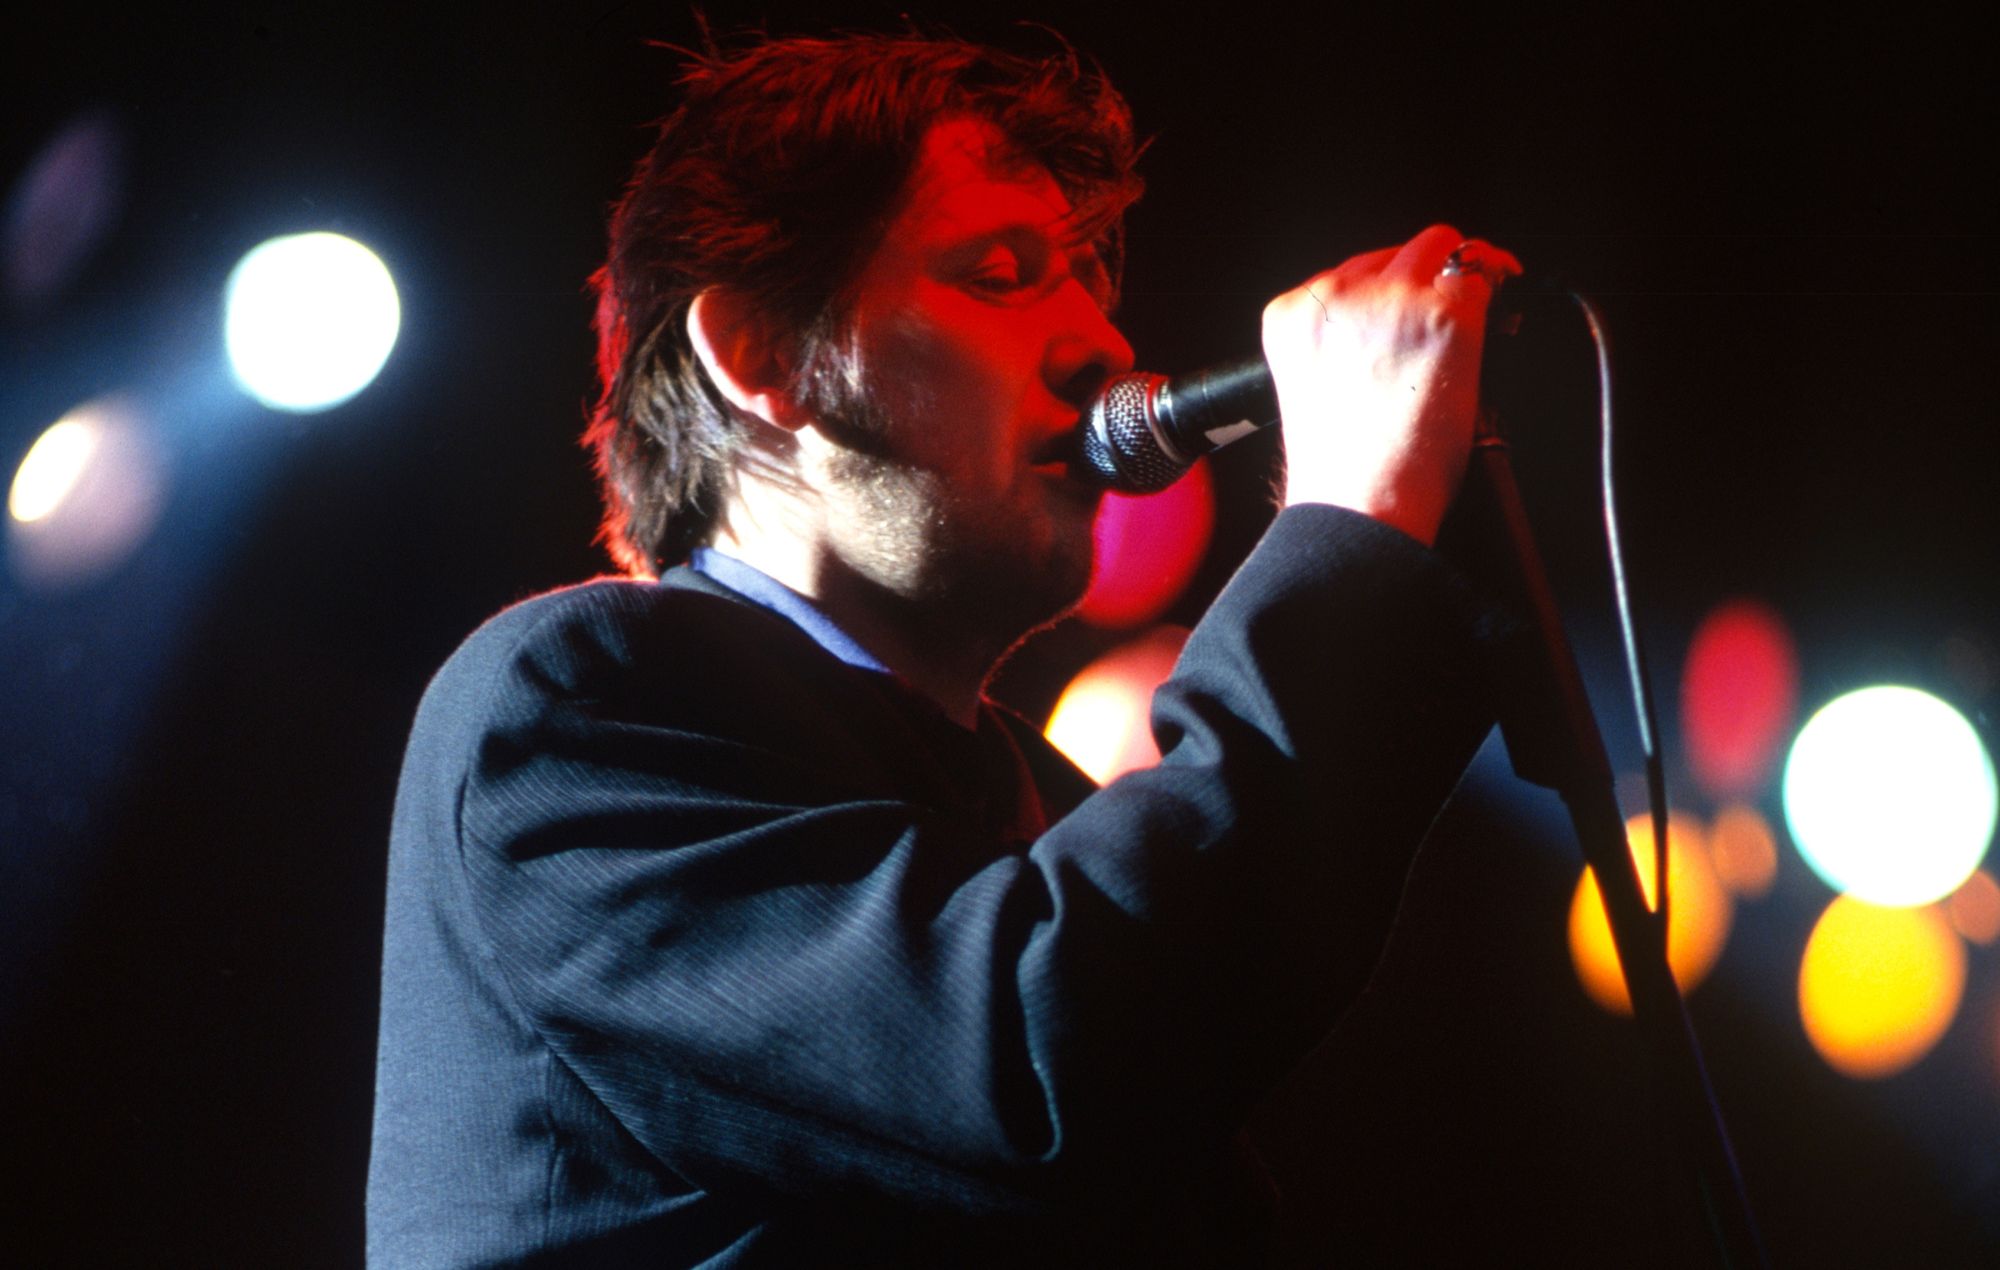 Shane MacGowan’s widow shares emotional tribute ahead of Pogues icon’s funeral